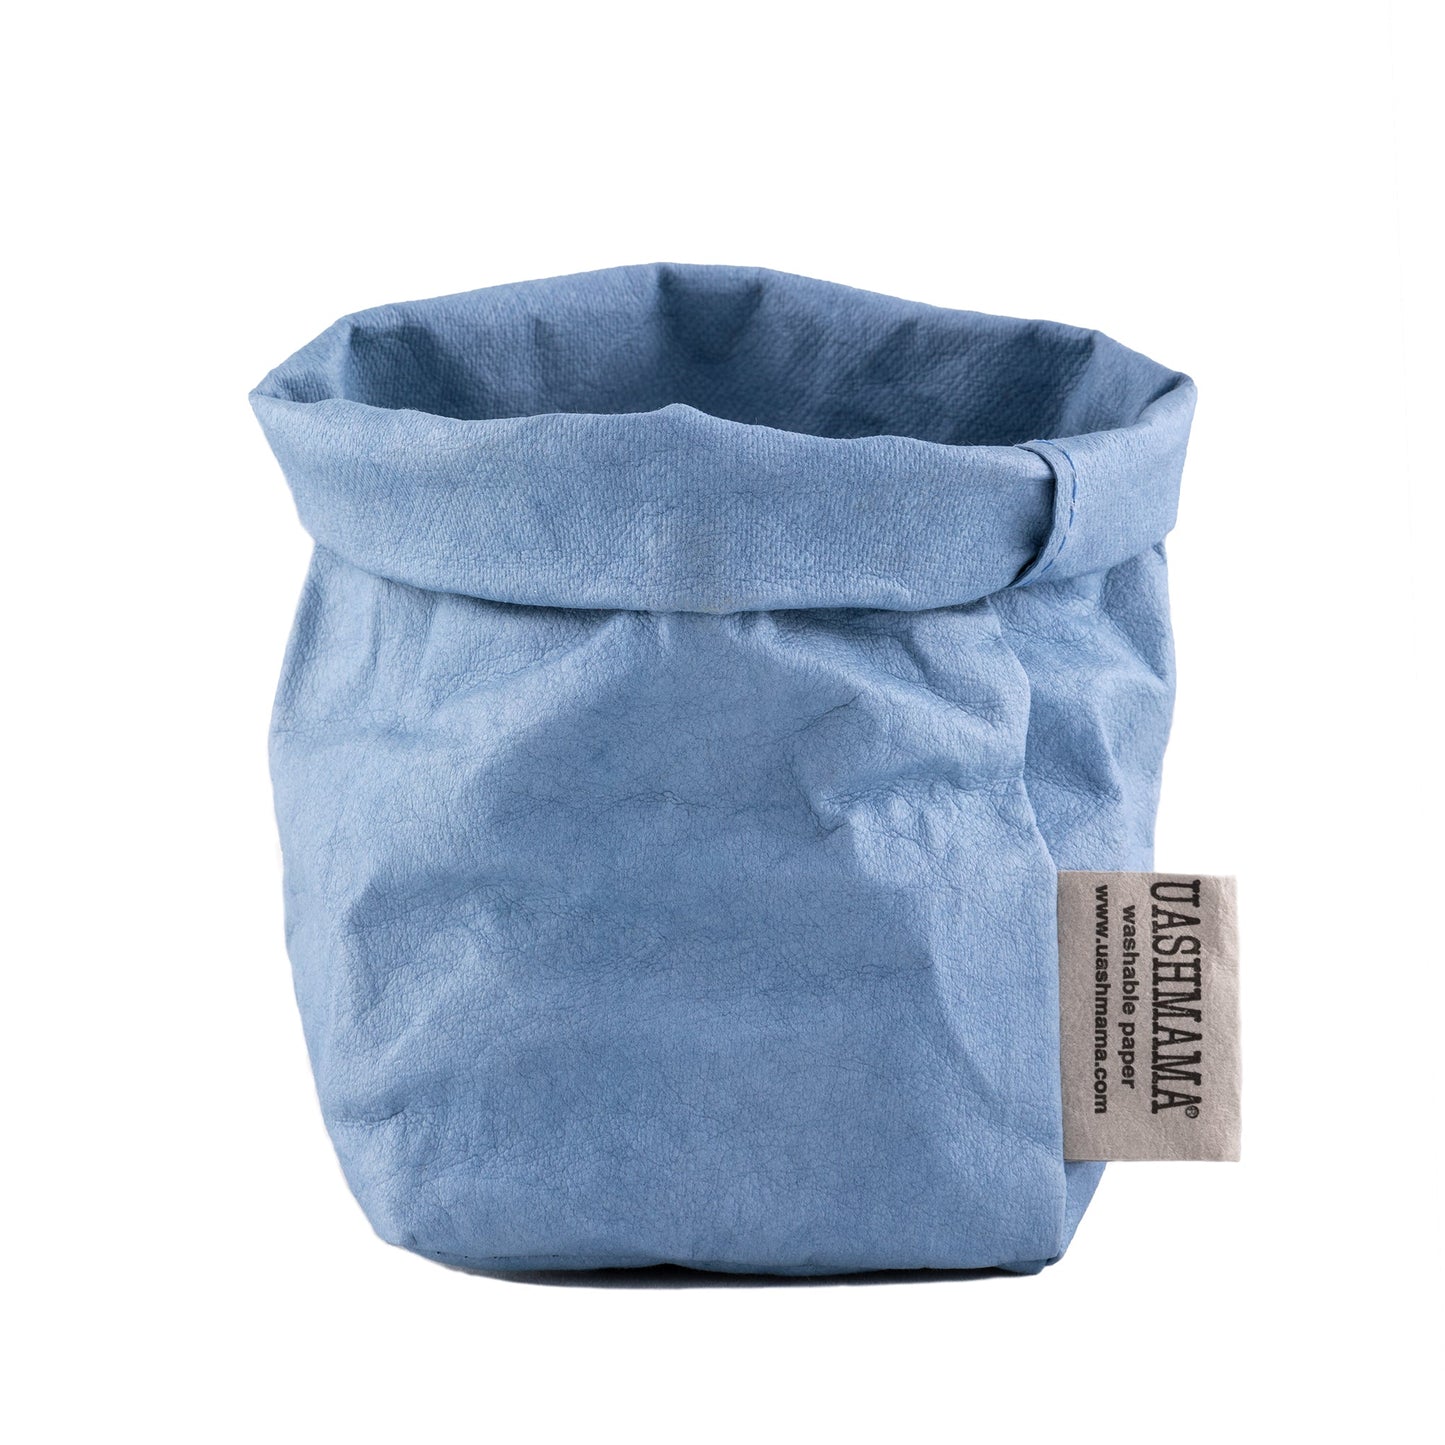 A washable paper bag is shown. The bag is rolled down at the top and features a UASHMAMA logo label on the bottom left corner. The bag pictured is the piccolo size in light blue.